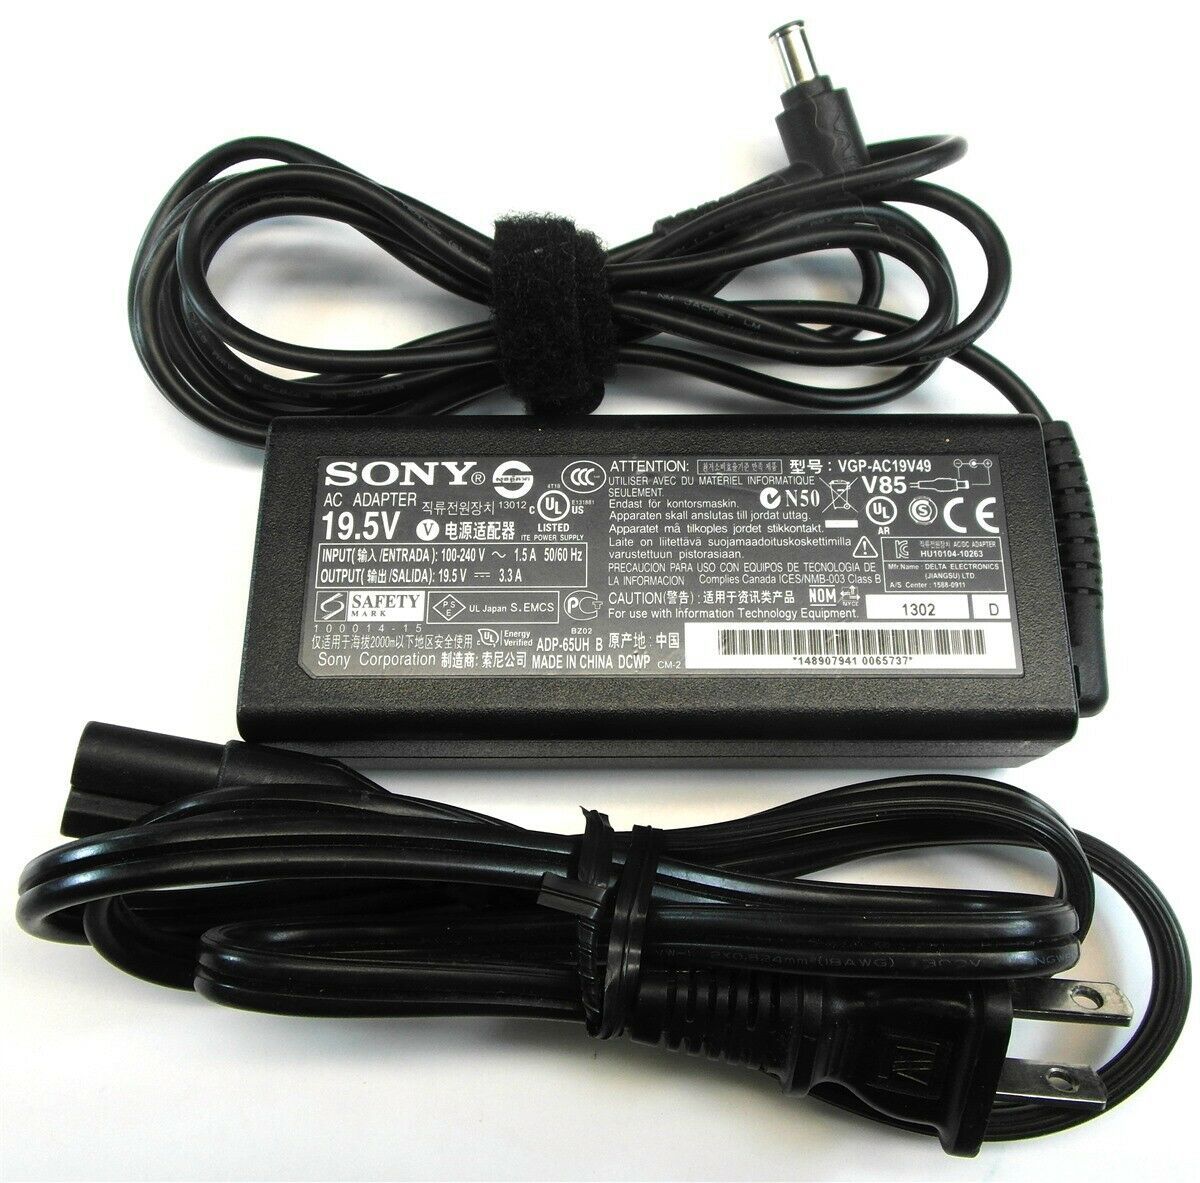 NEW Sony VGP-AC19V49 ADP-65UH B 65W 19.5V 3.3A Laptop Charger AC Adapter Power Supply